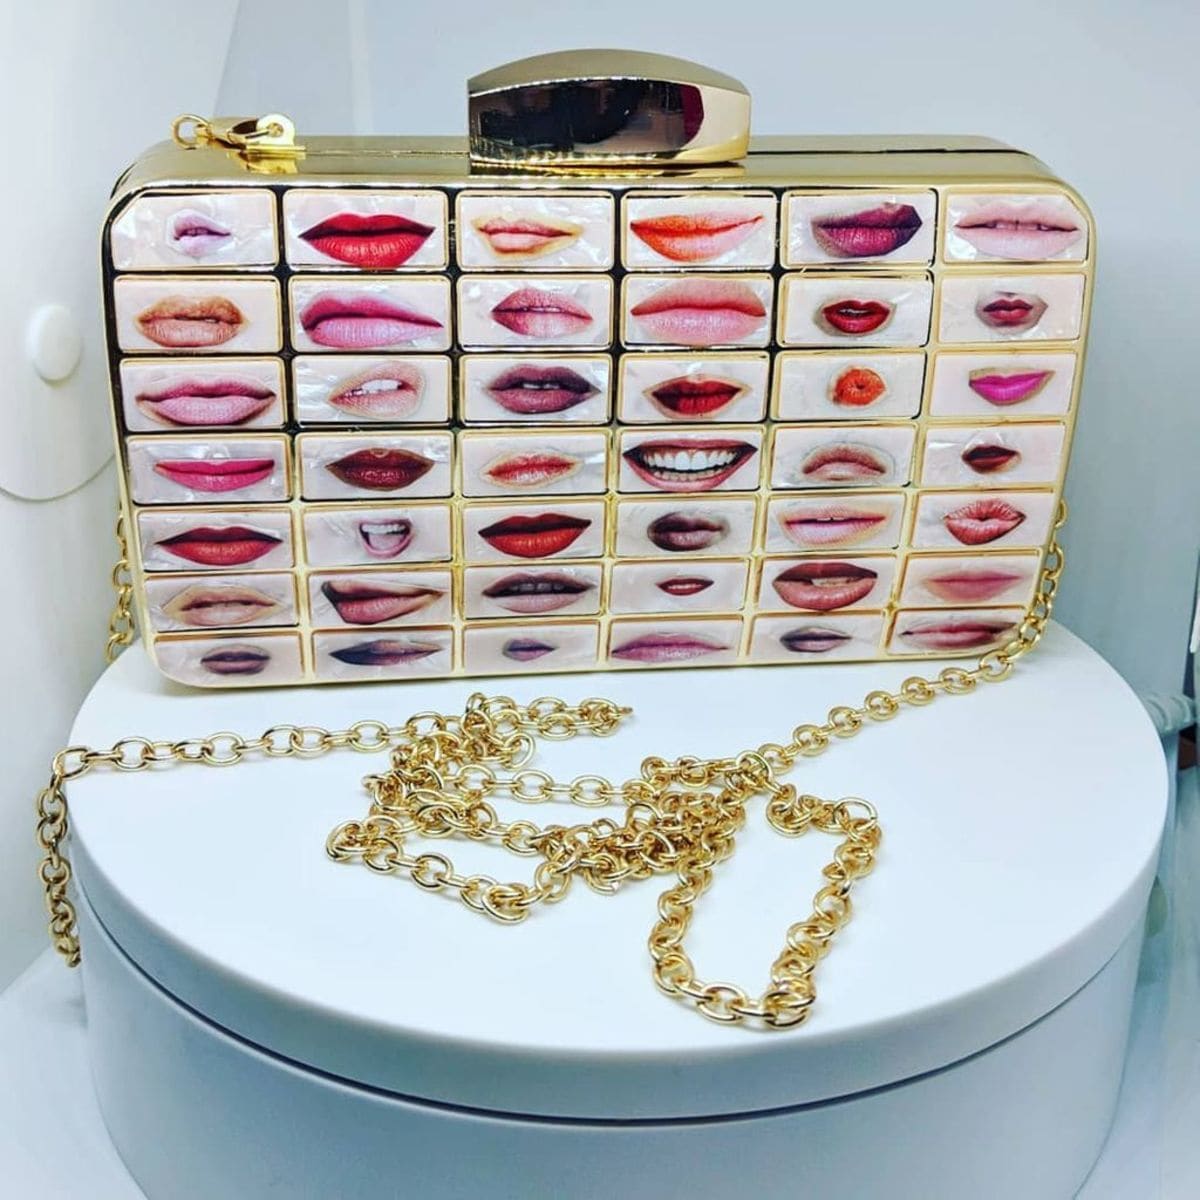 These Lips Are Sealed (handbag) by Laura Collins 